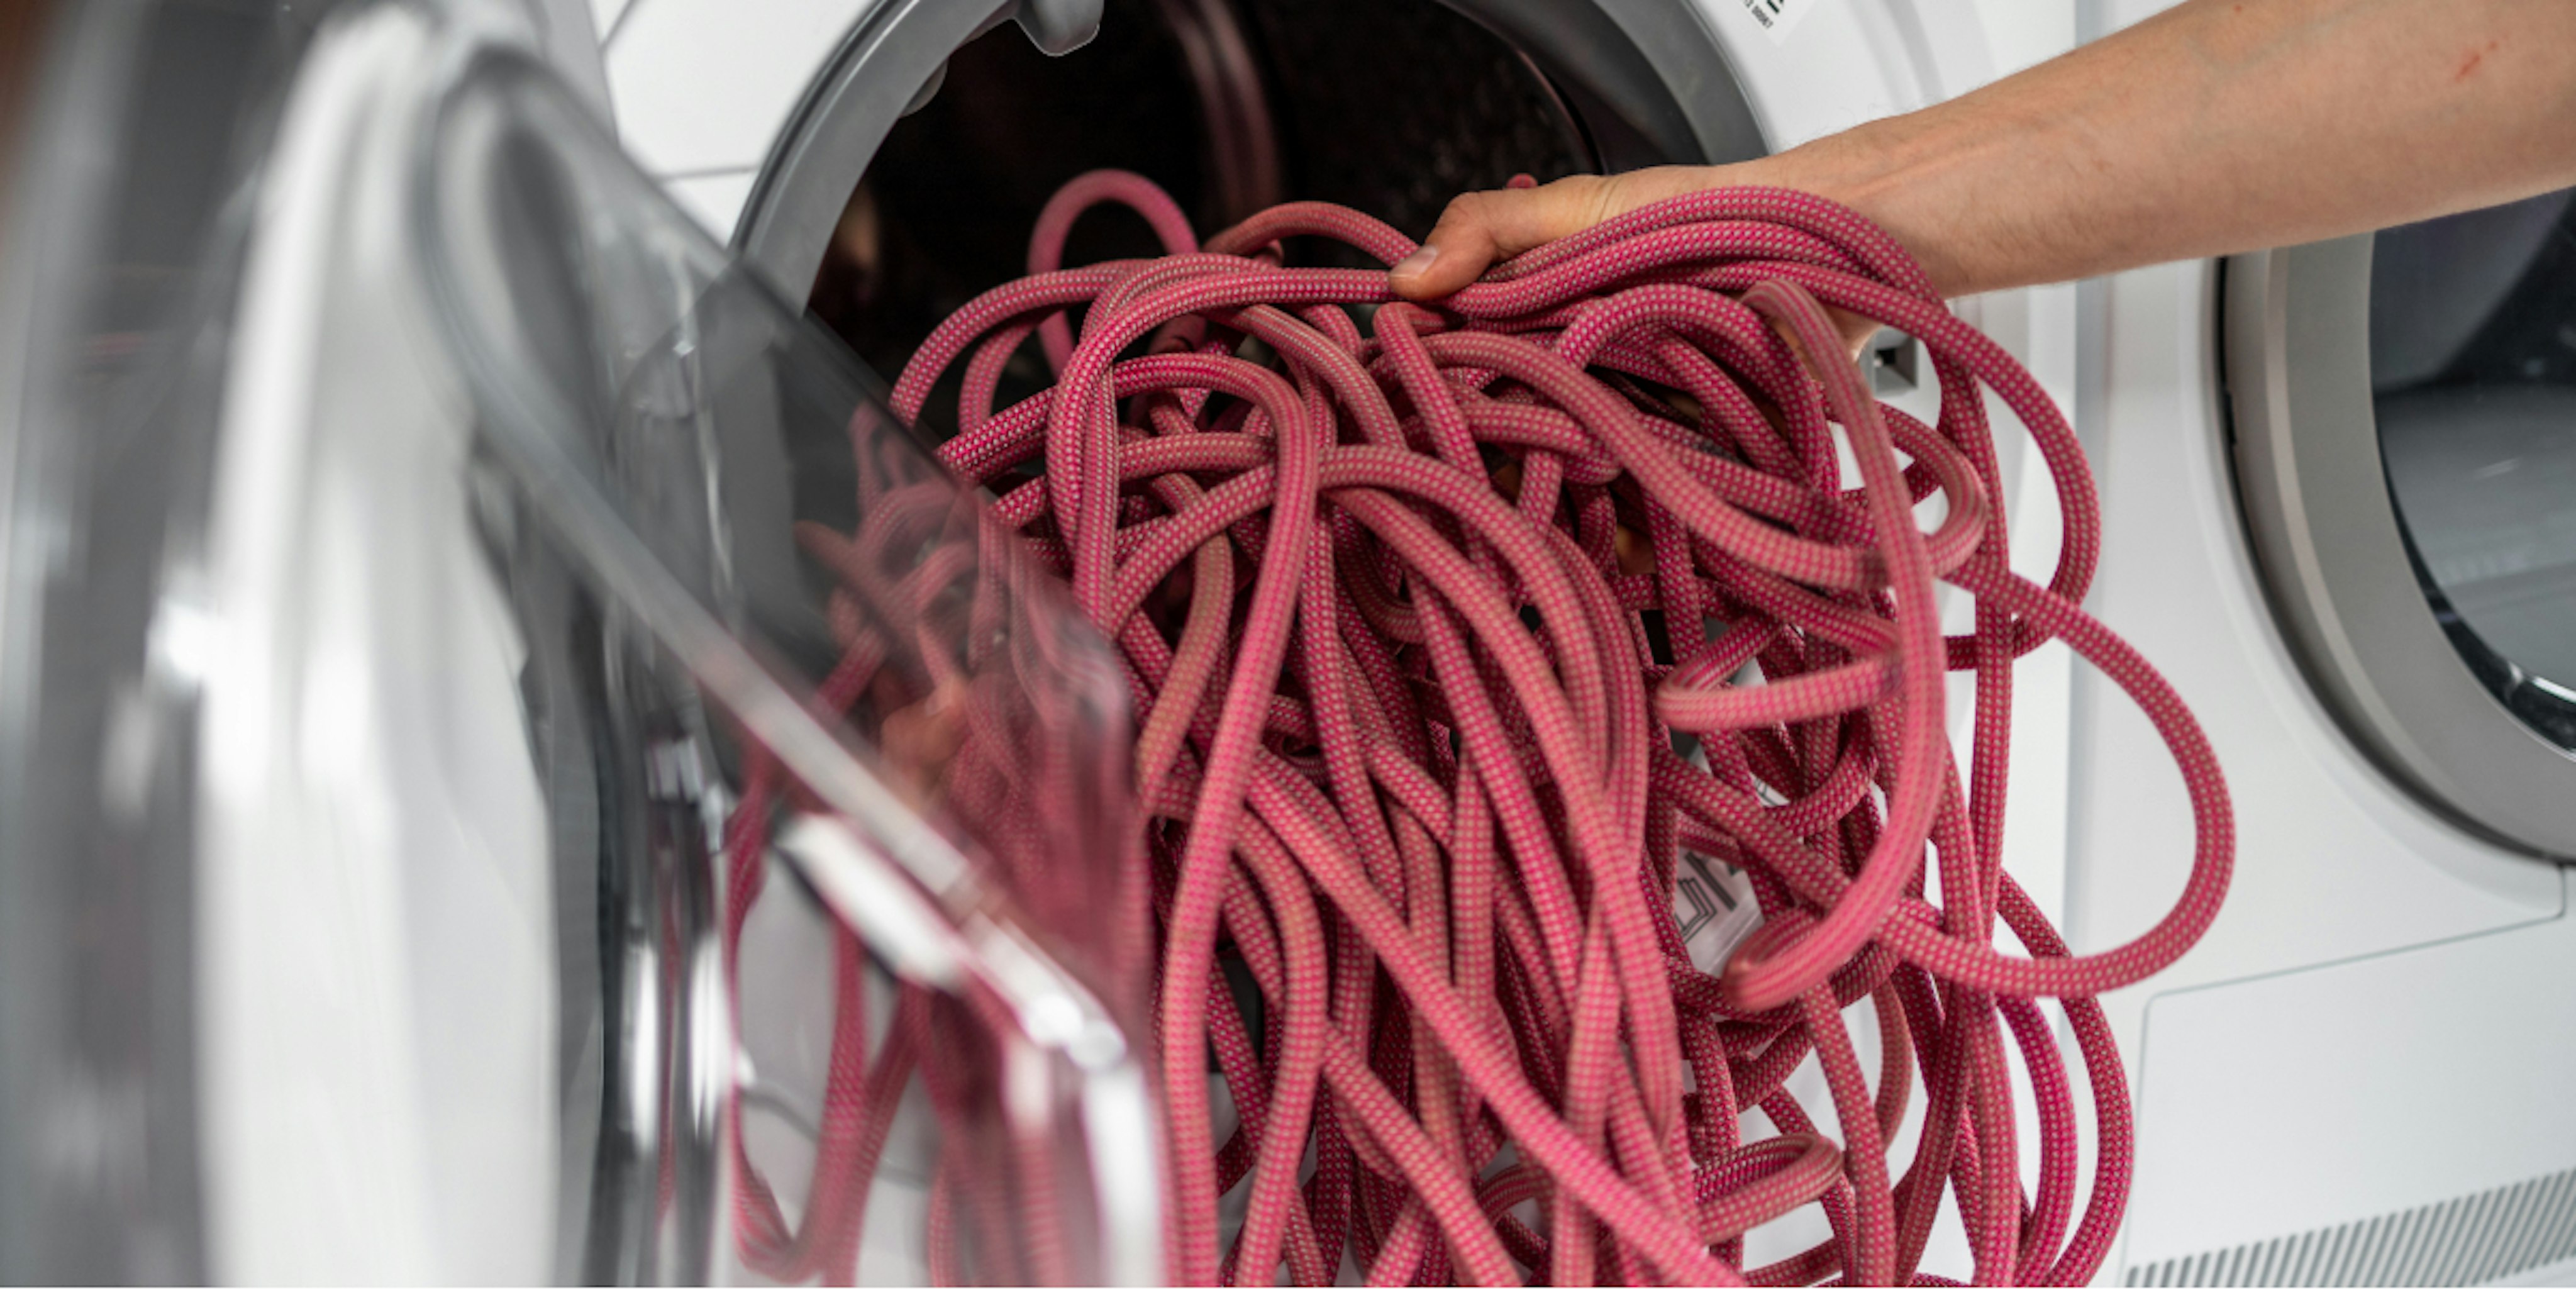 The rope is put in the washing machine